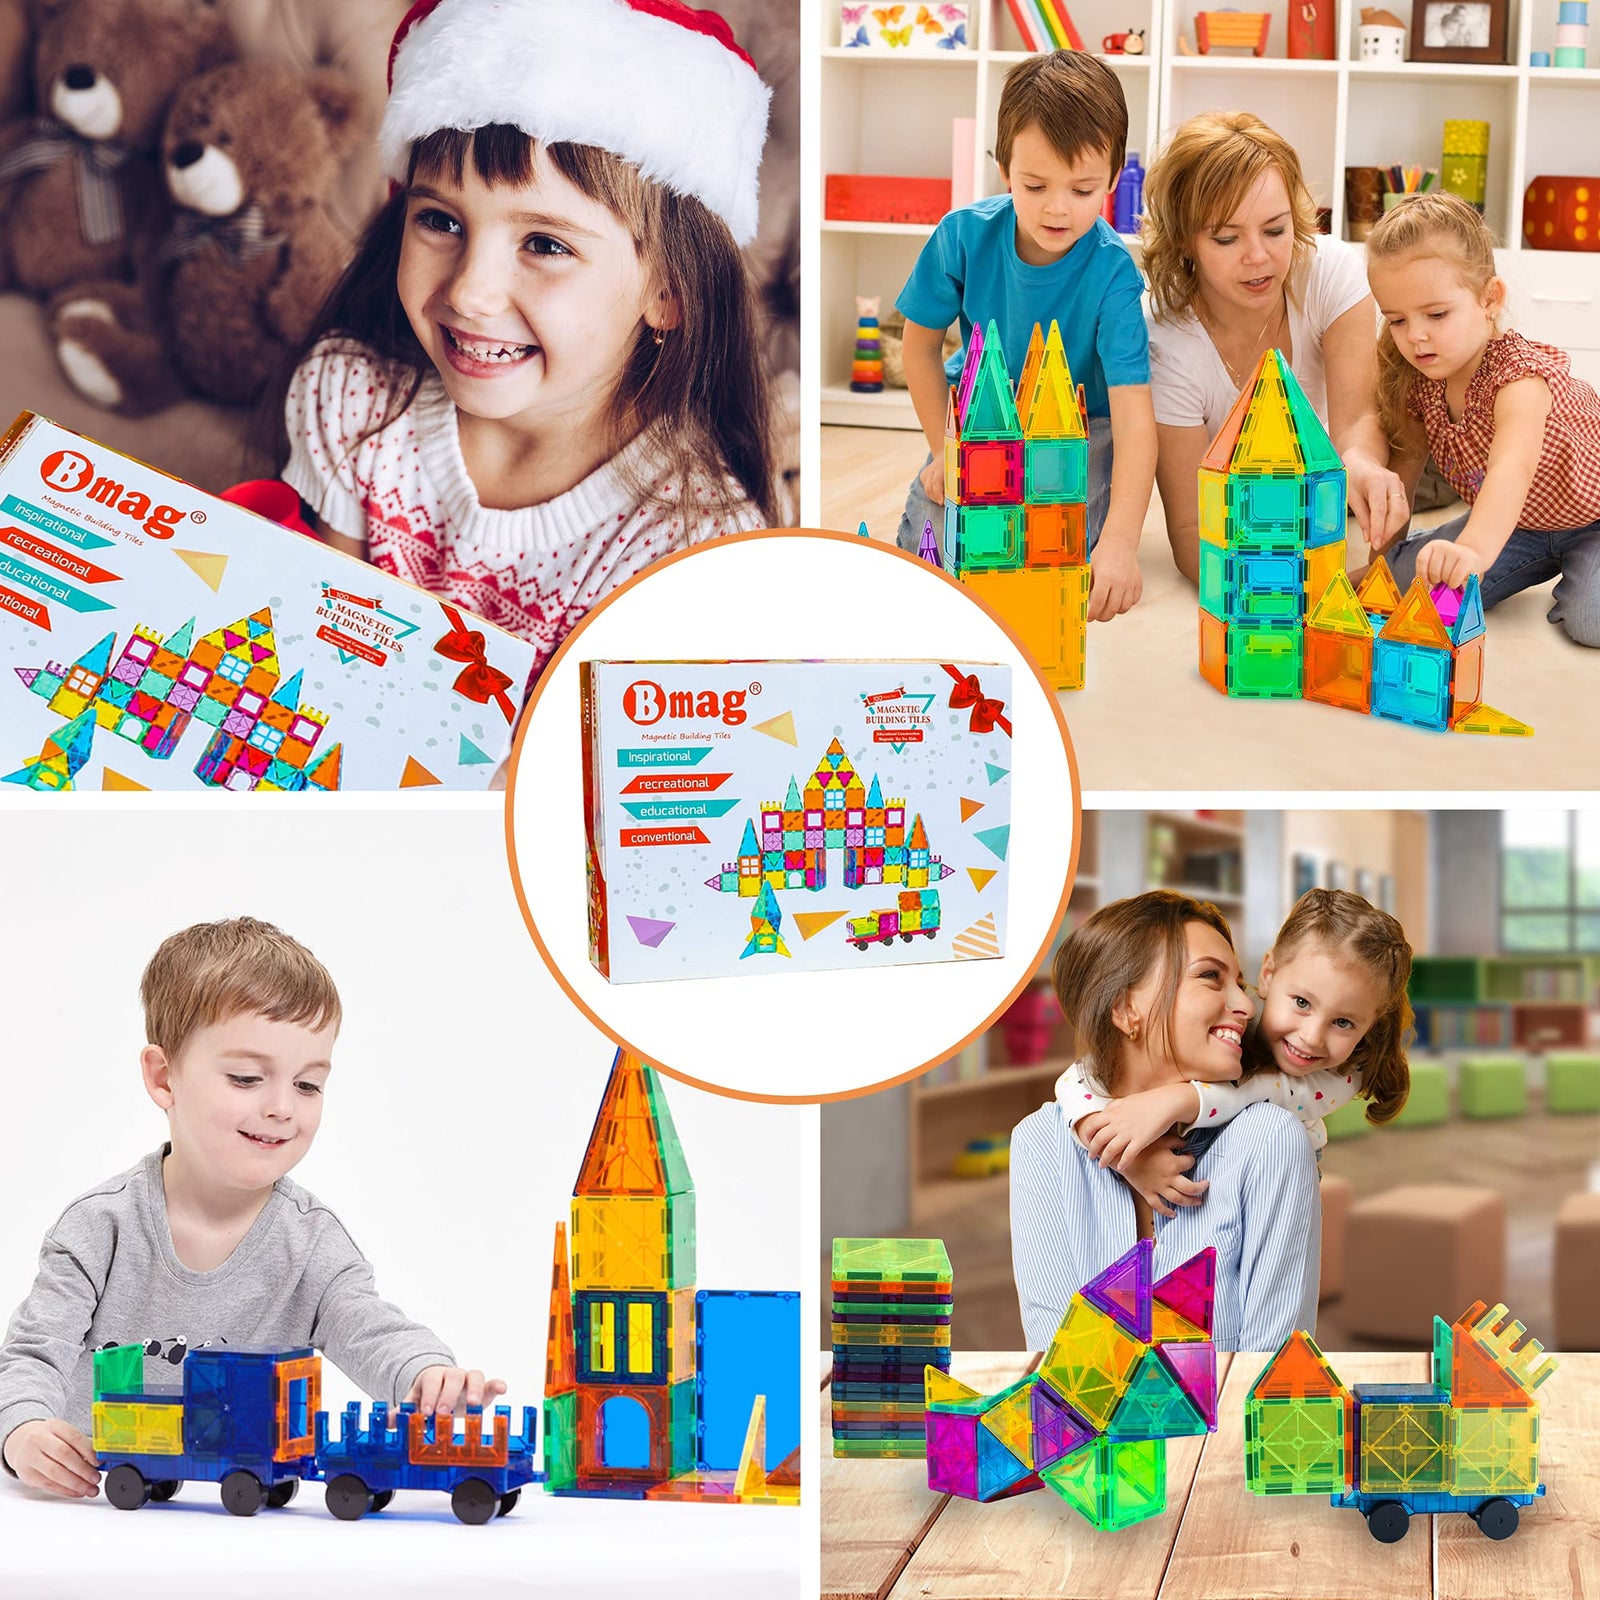 BMAG Magnetic Tiles, 3D Magnet Building Blocks for Kids Toddlers, Stacking Montessori Toys for Children, STEM Preschool Educational Learning Construction Toys for Boys Girls with 2 Cars